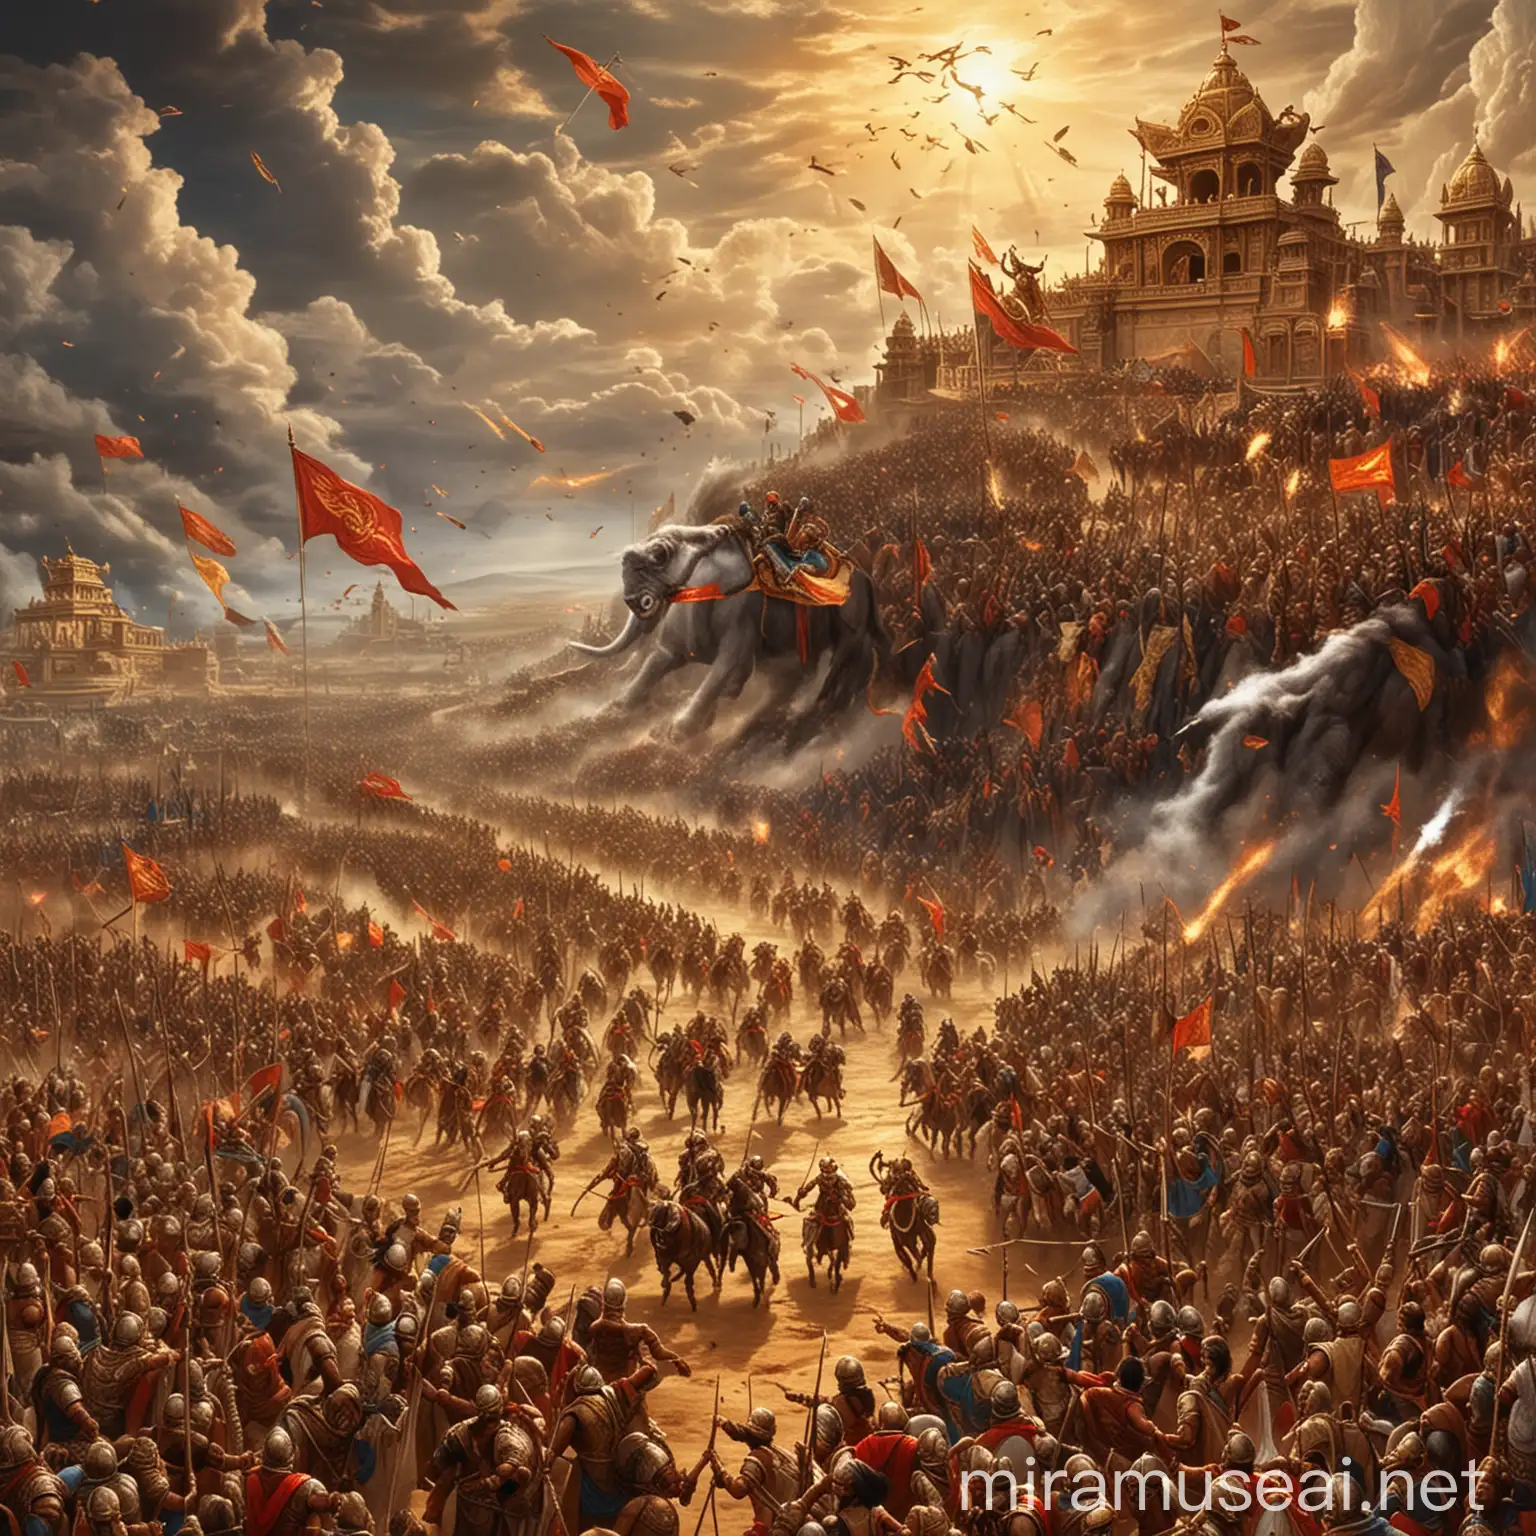 Epic Battle Forces of Fantasy Clash in the Mahabharat with Karn